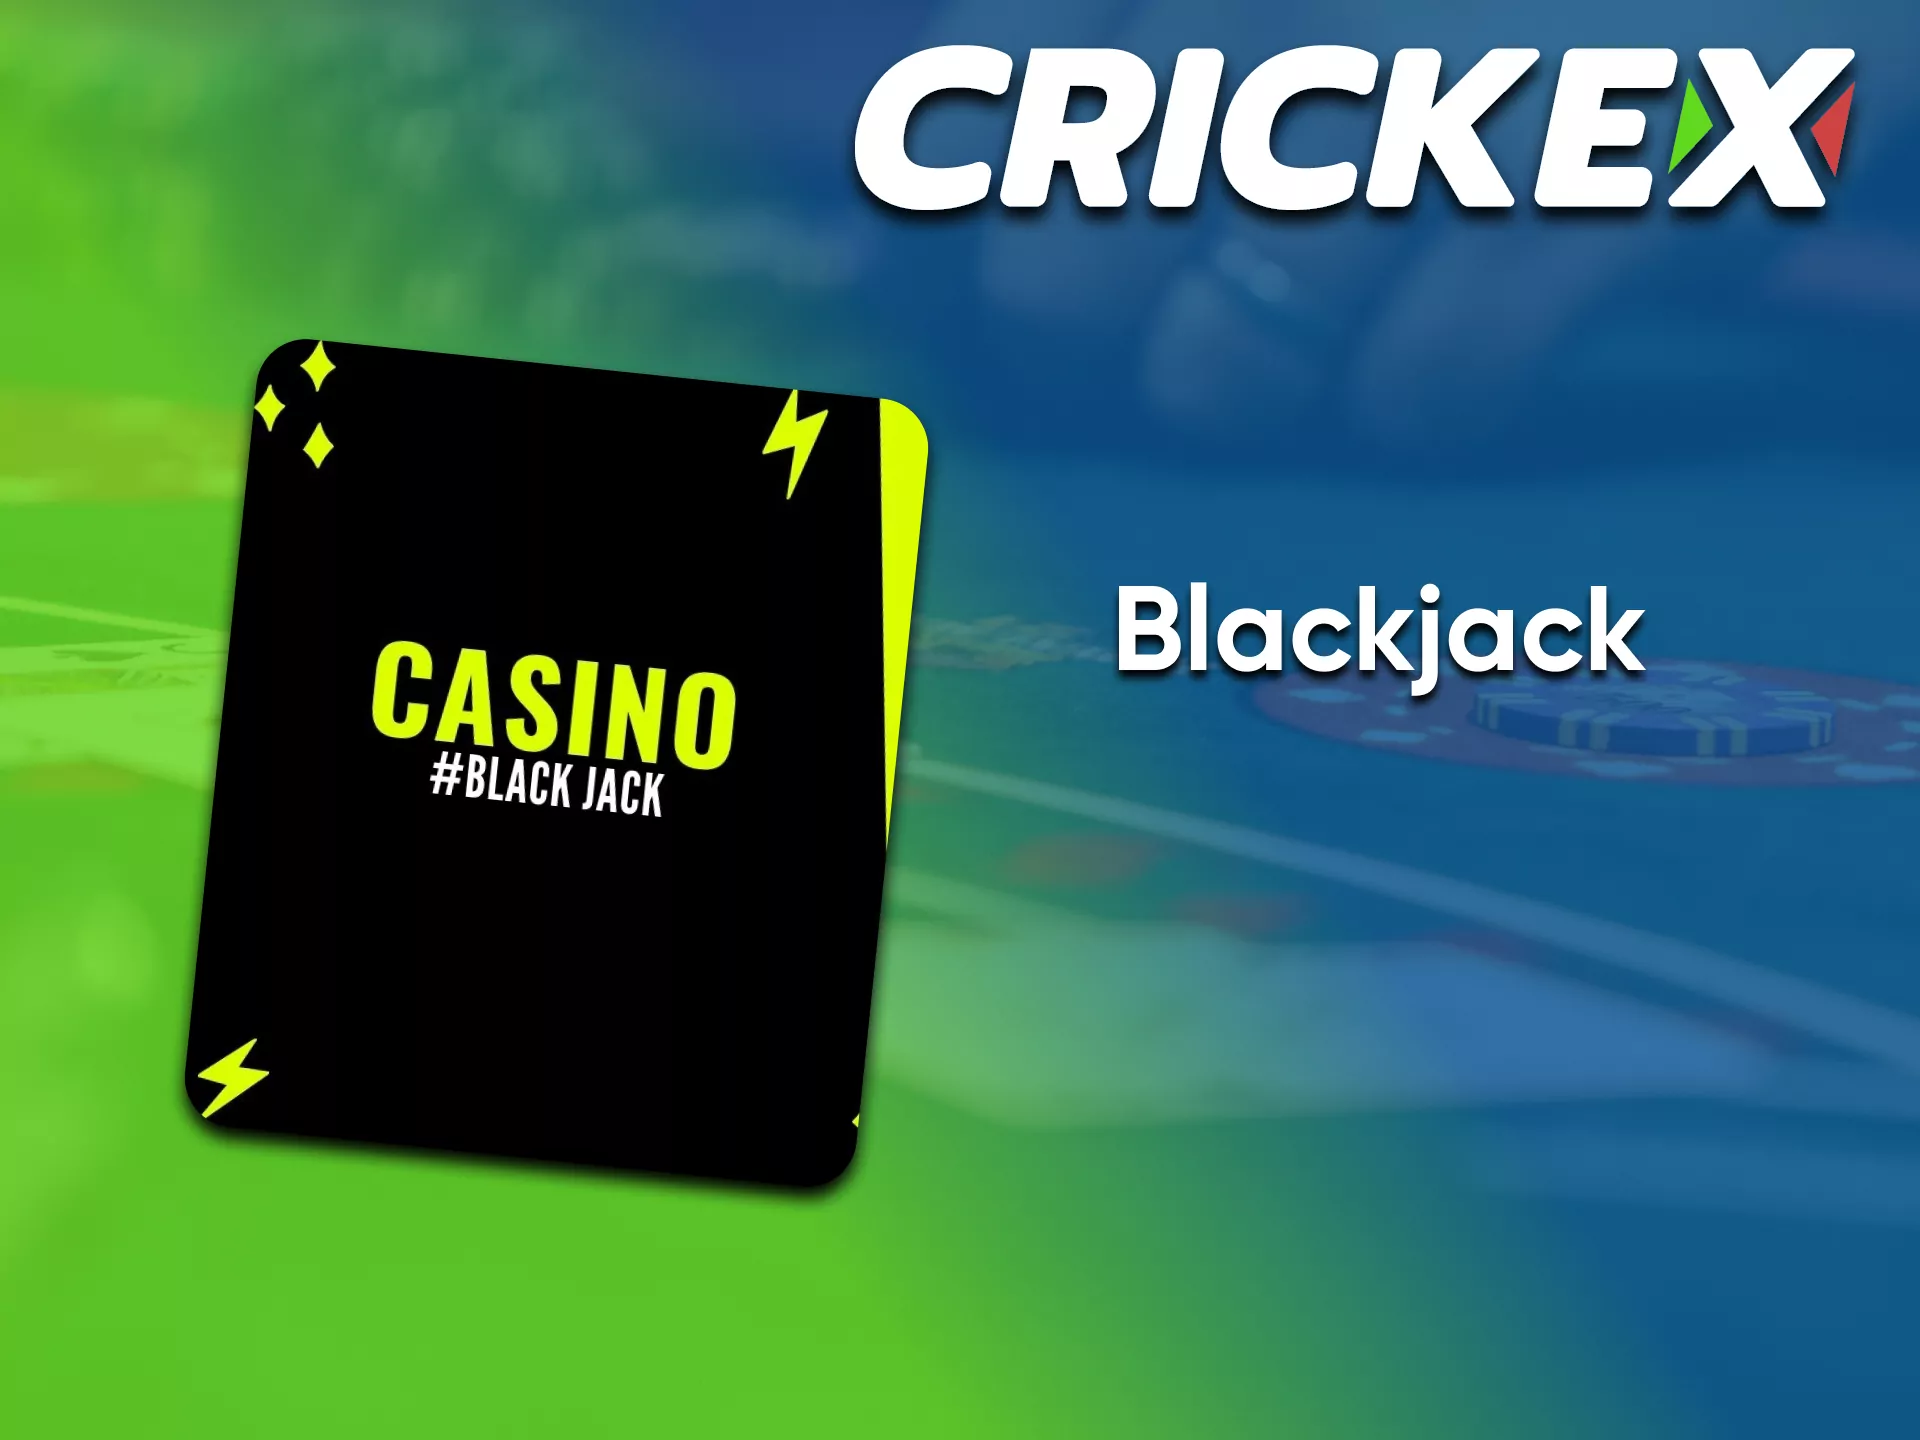 Blackjack is one of the many games at Crickex casino.